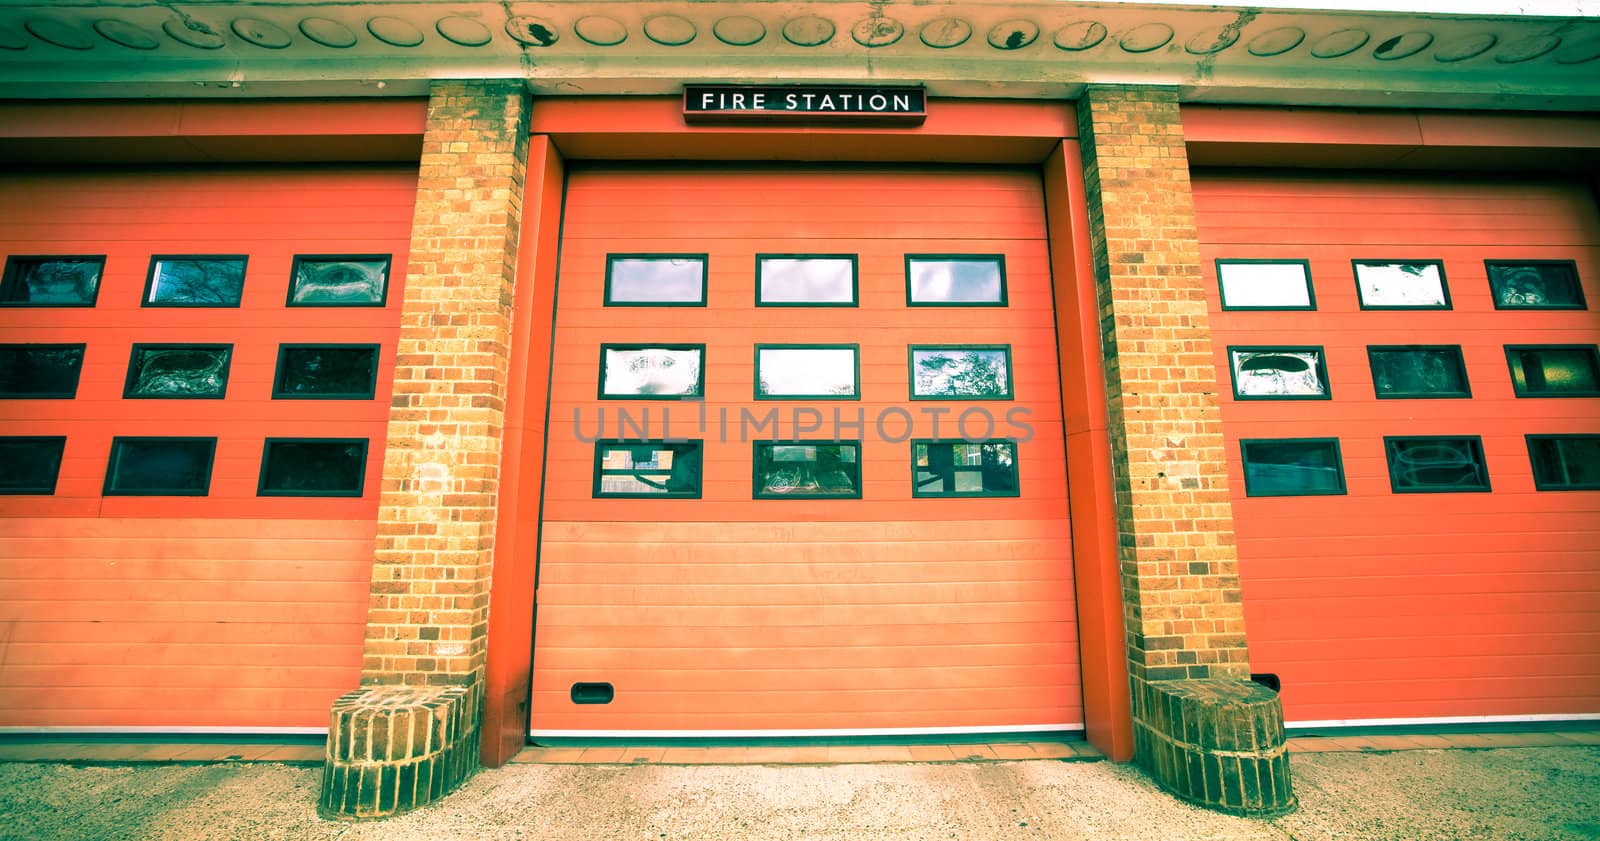 Nice vintage toned image of a fire station in the UK